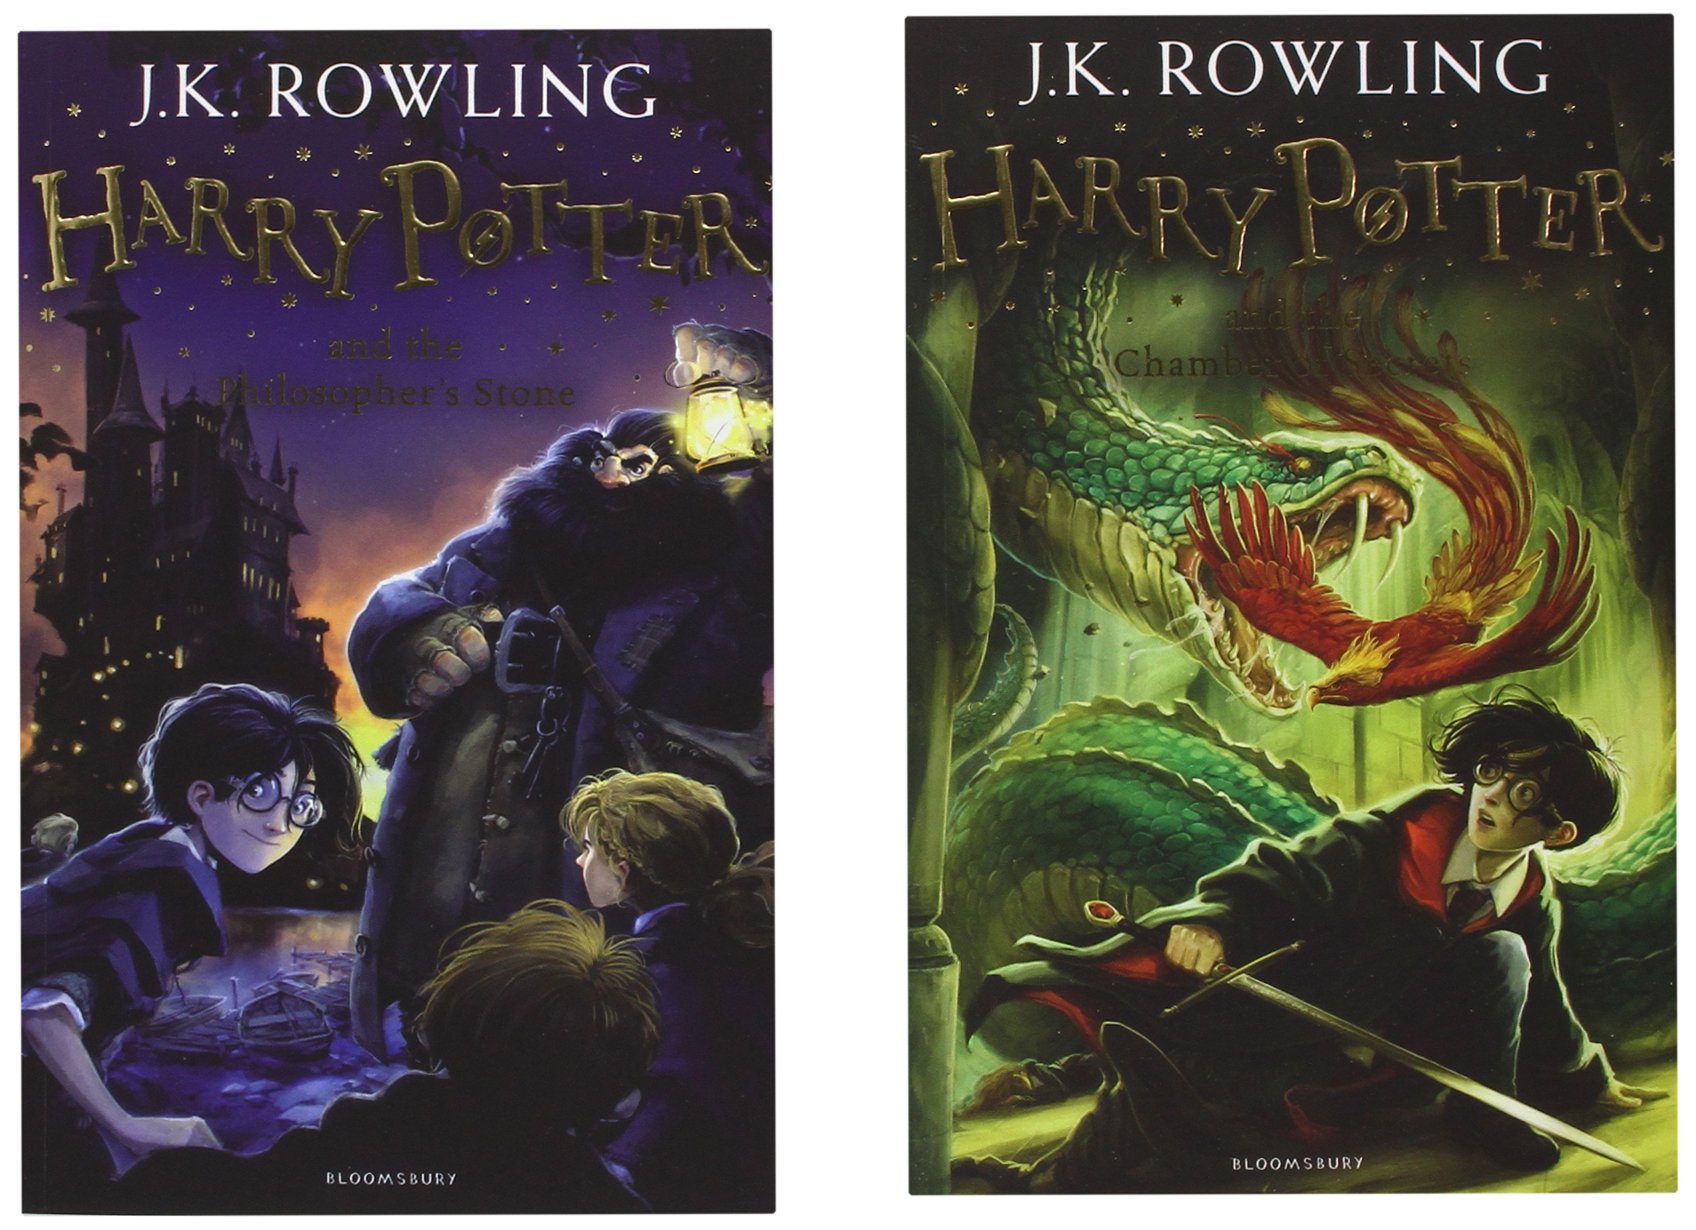 jk rowling harry potter the complete collection